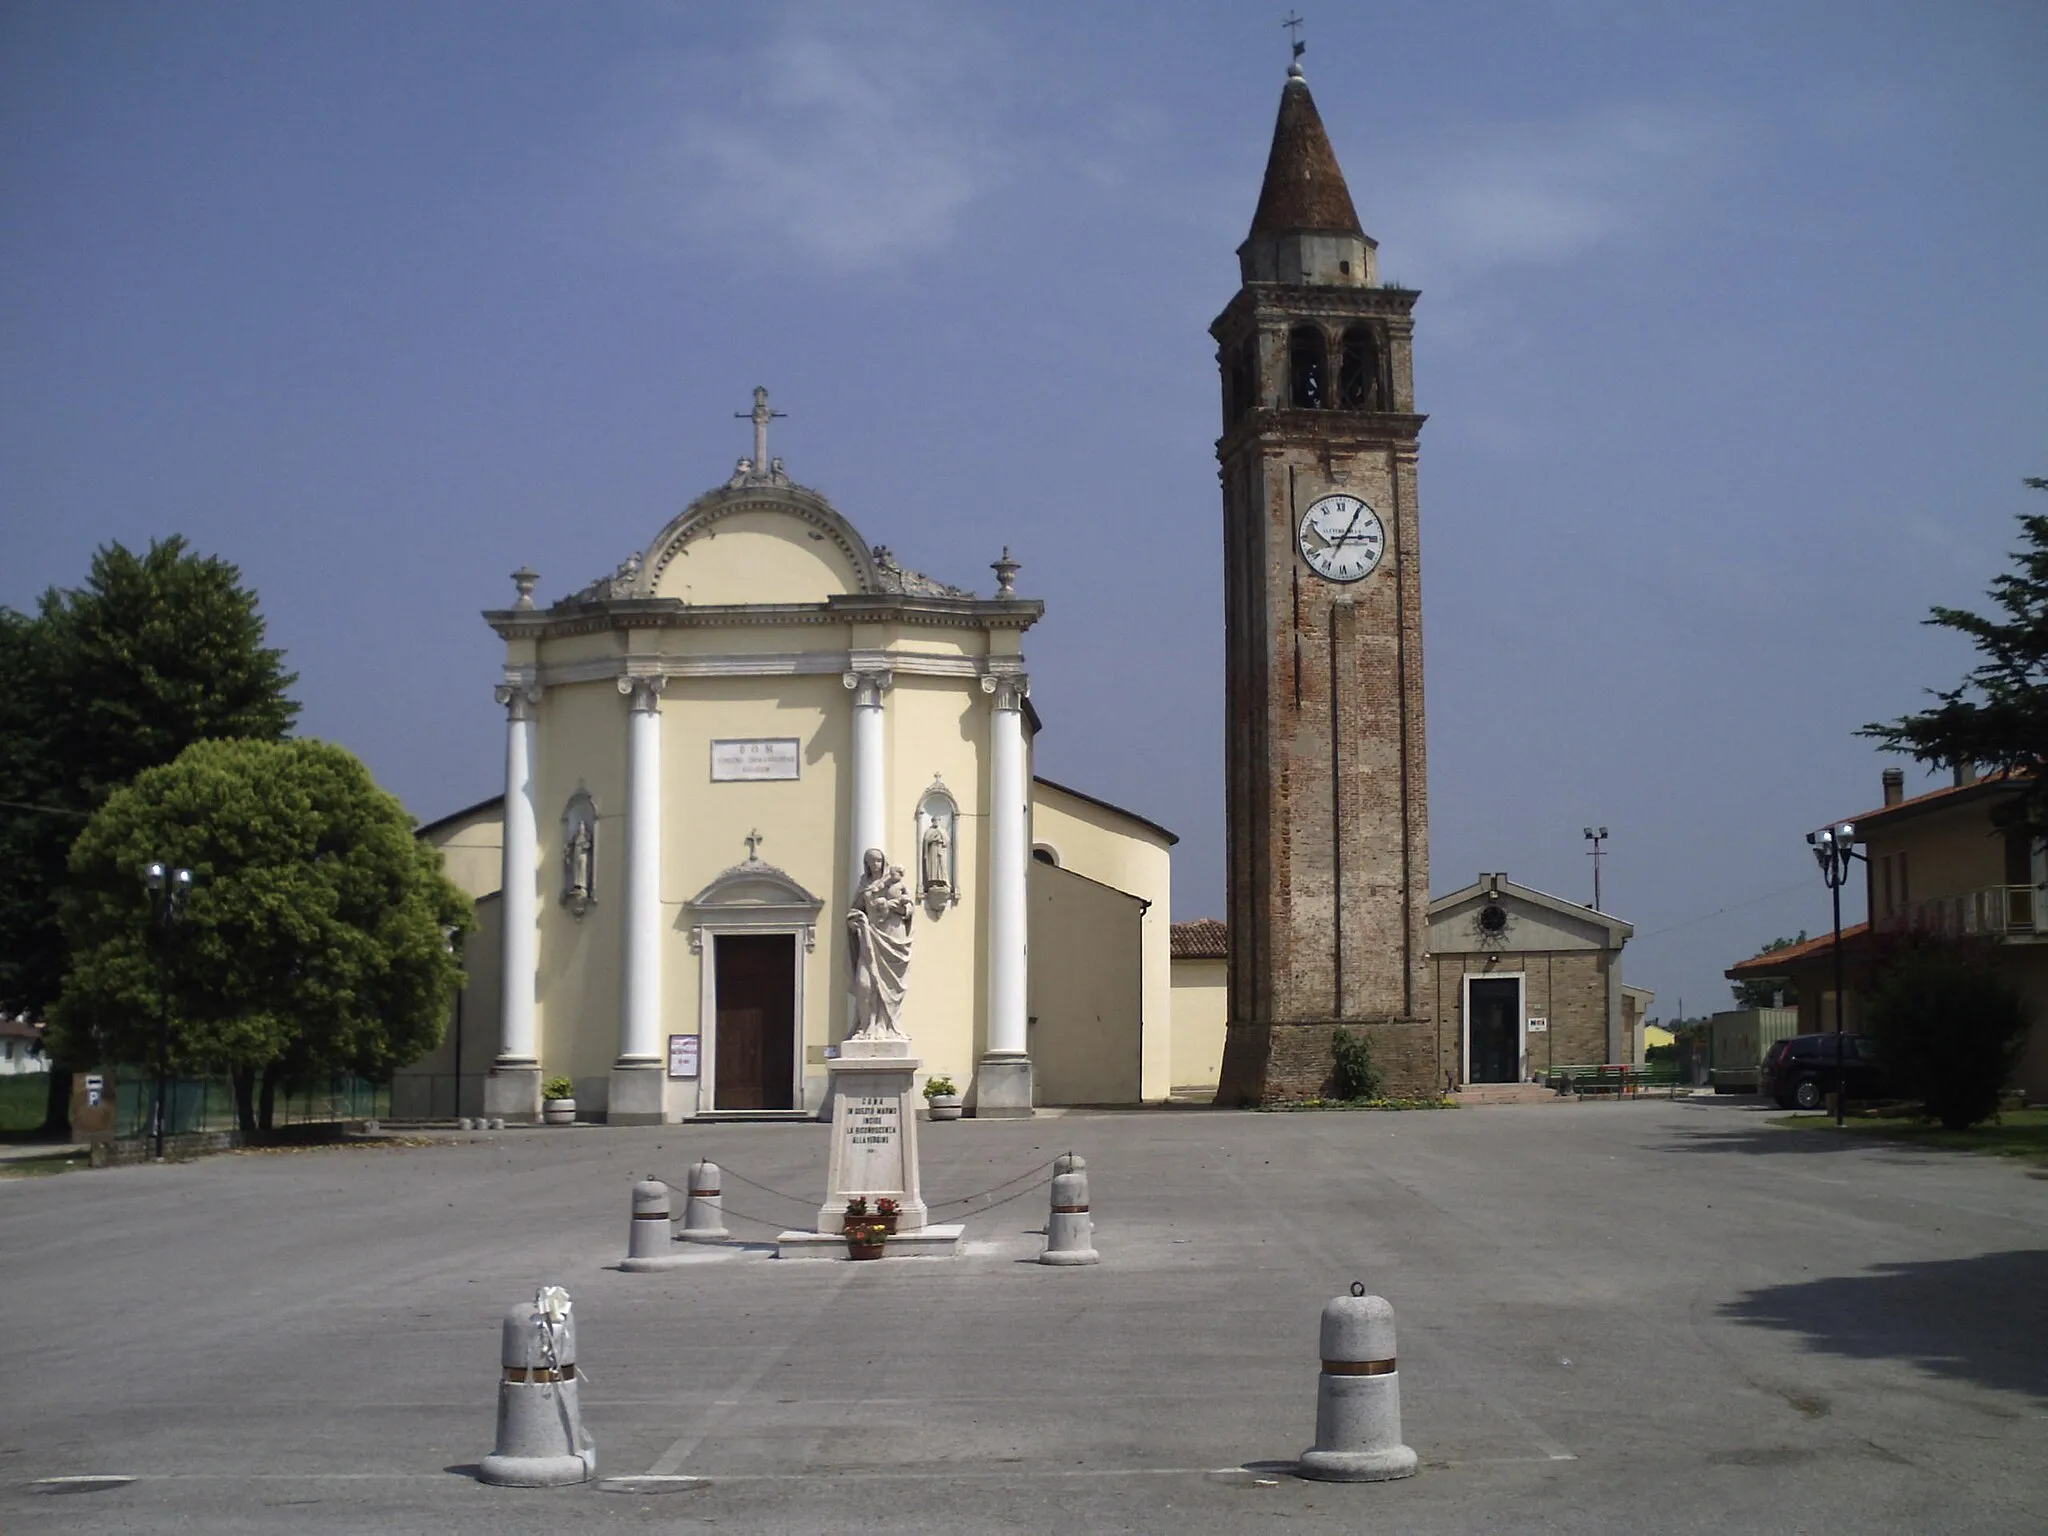 Photo showing: The main square of Cona, Italy